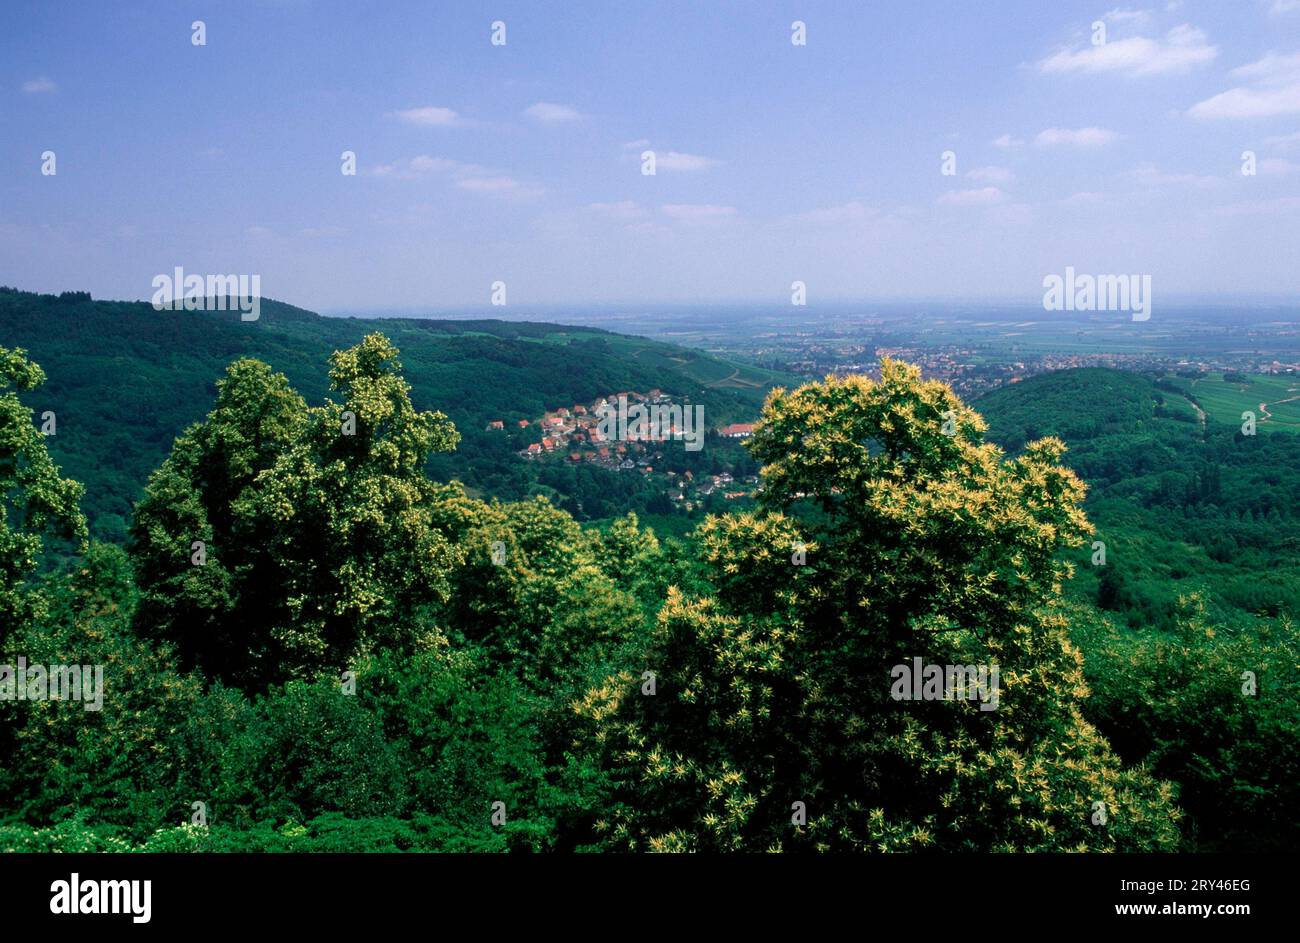 View from the Chateau du Haut-Andlau in direction Barr, Alsace, France, View from the Chateau du Haut-Andlau in direction Barr, Alsace, France Stock Photo